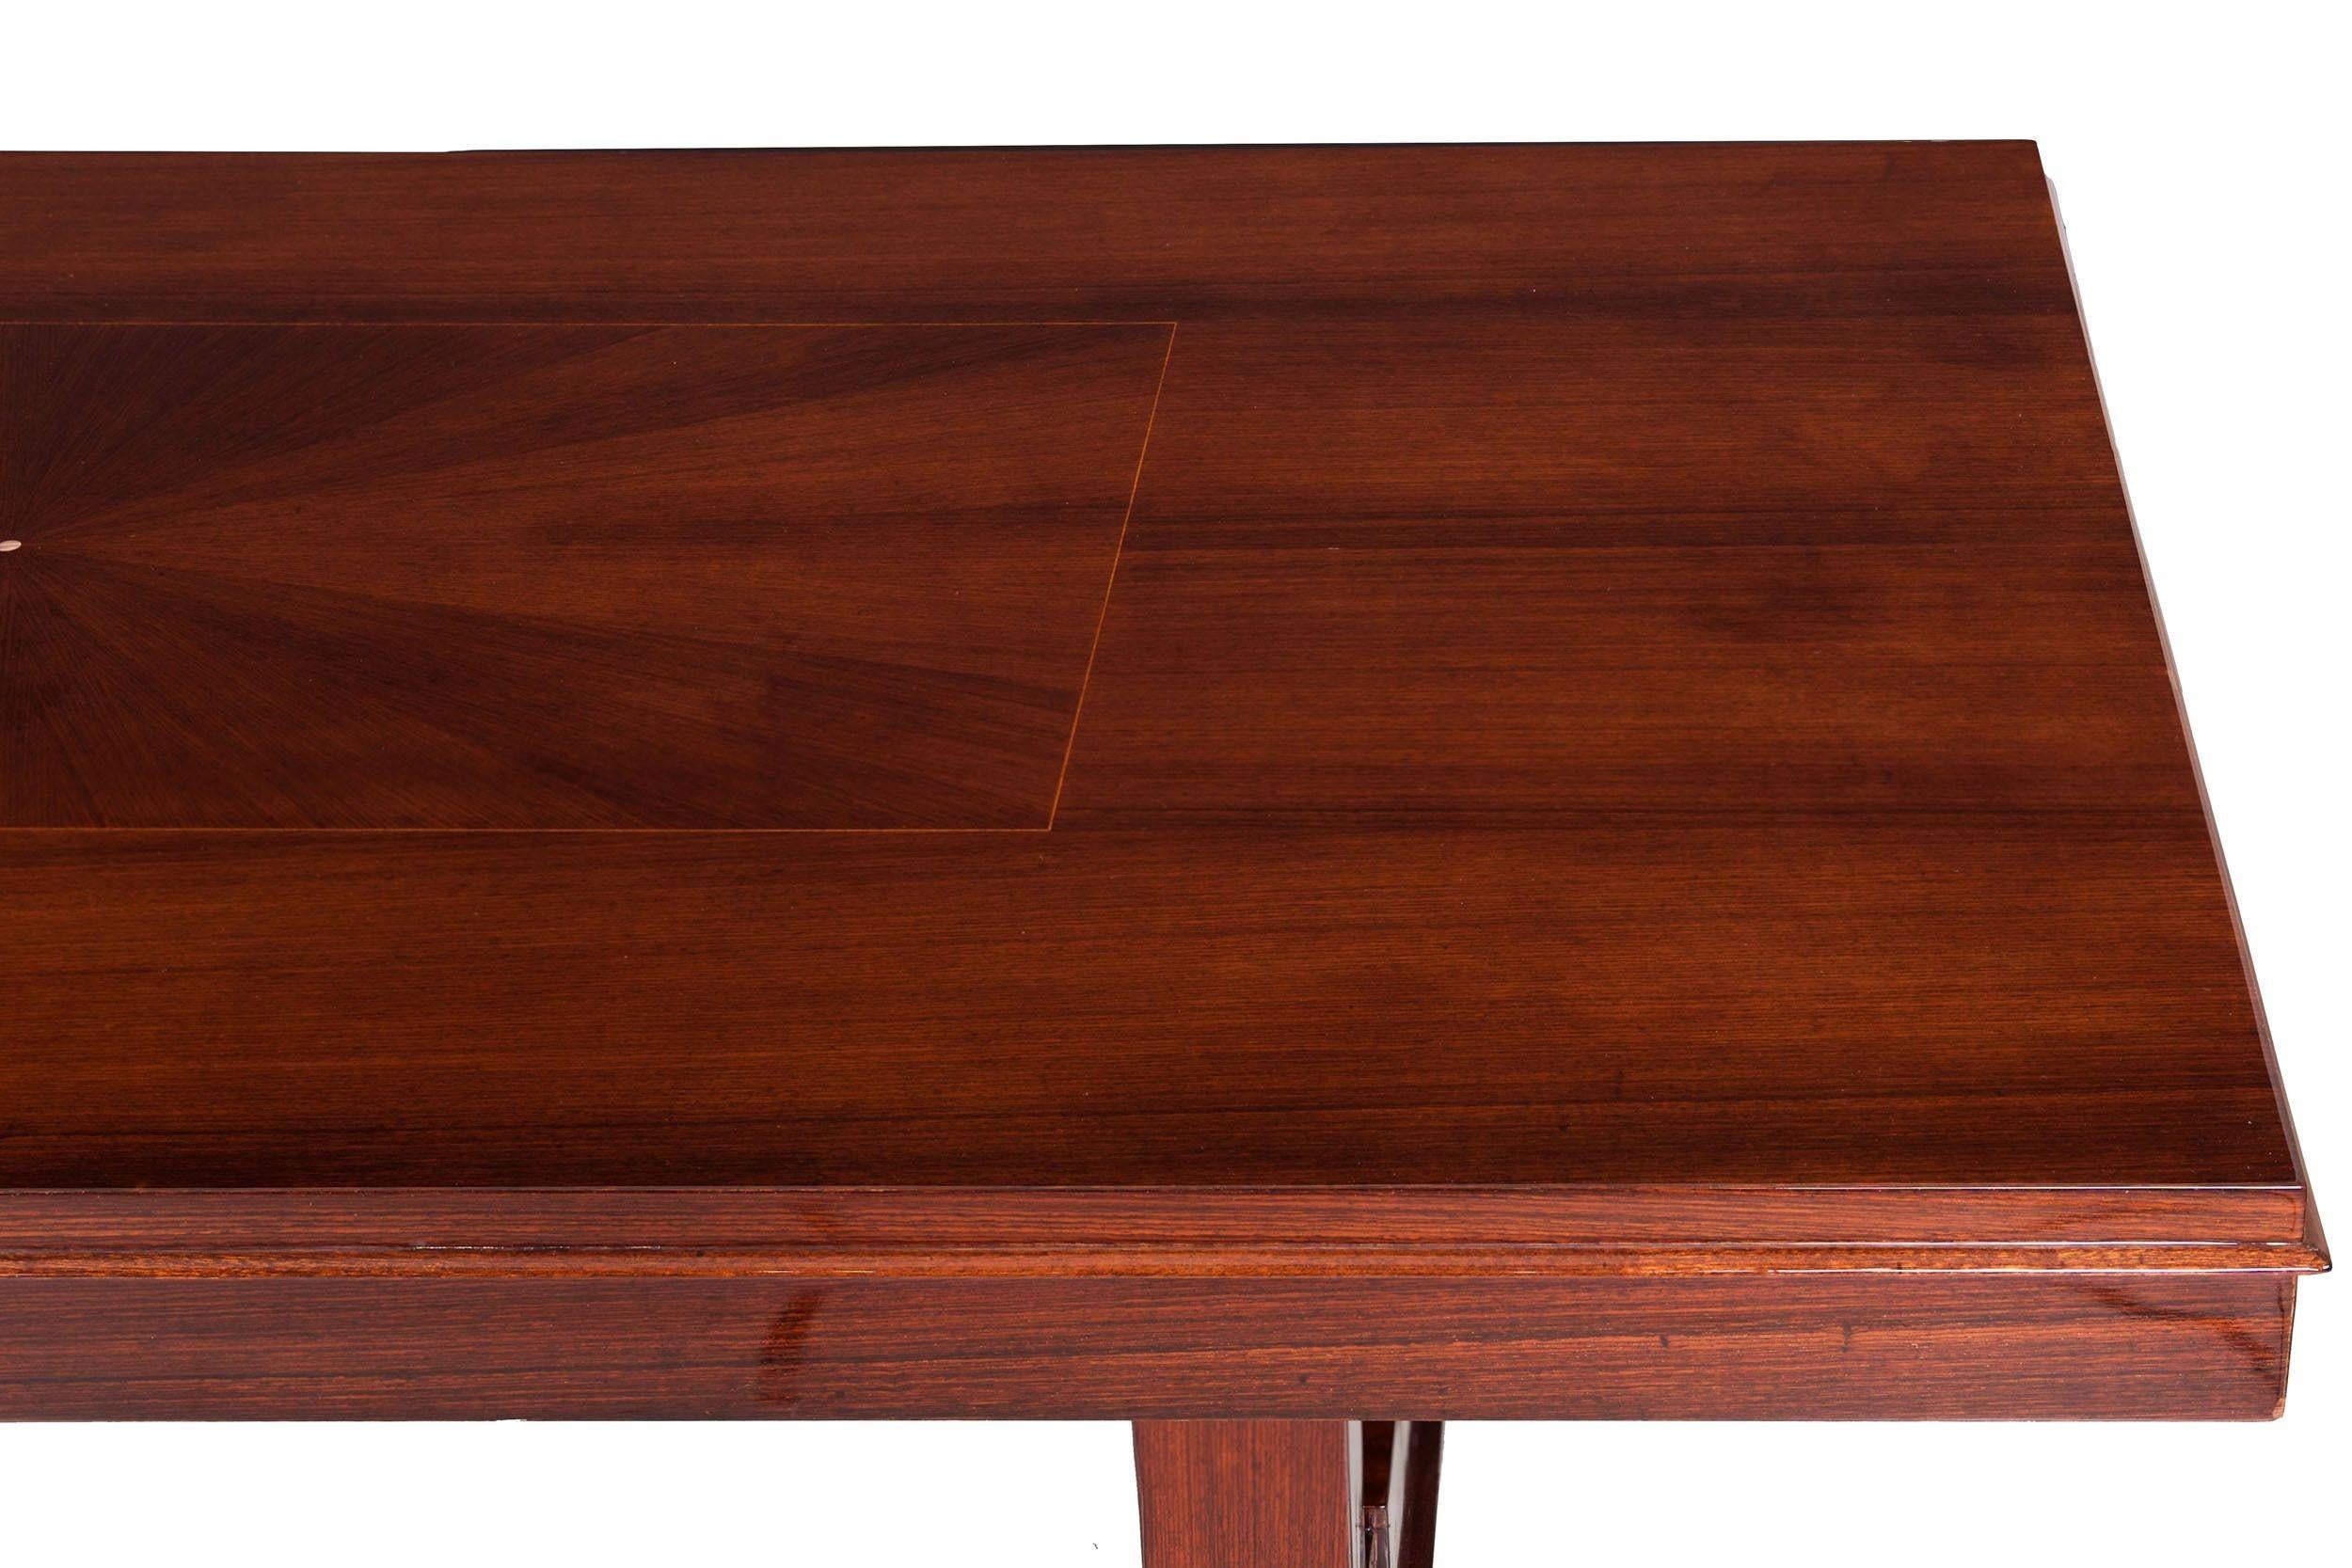 French Art Deco Inlaid Mother-of-Pearl Rosewood Dining Table, circa 1940s For Sale 14